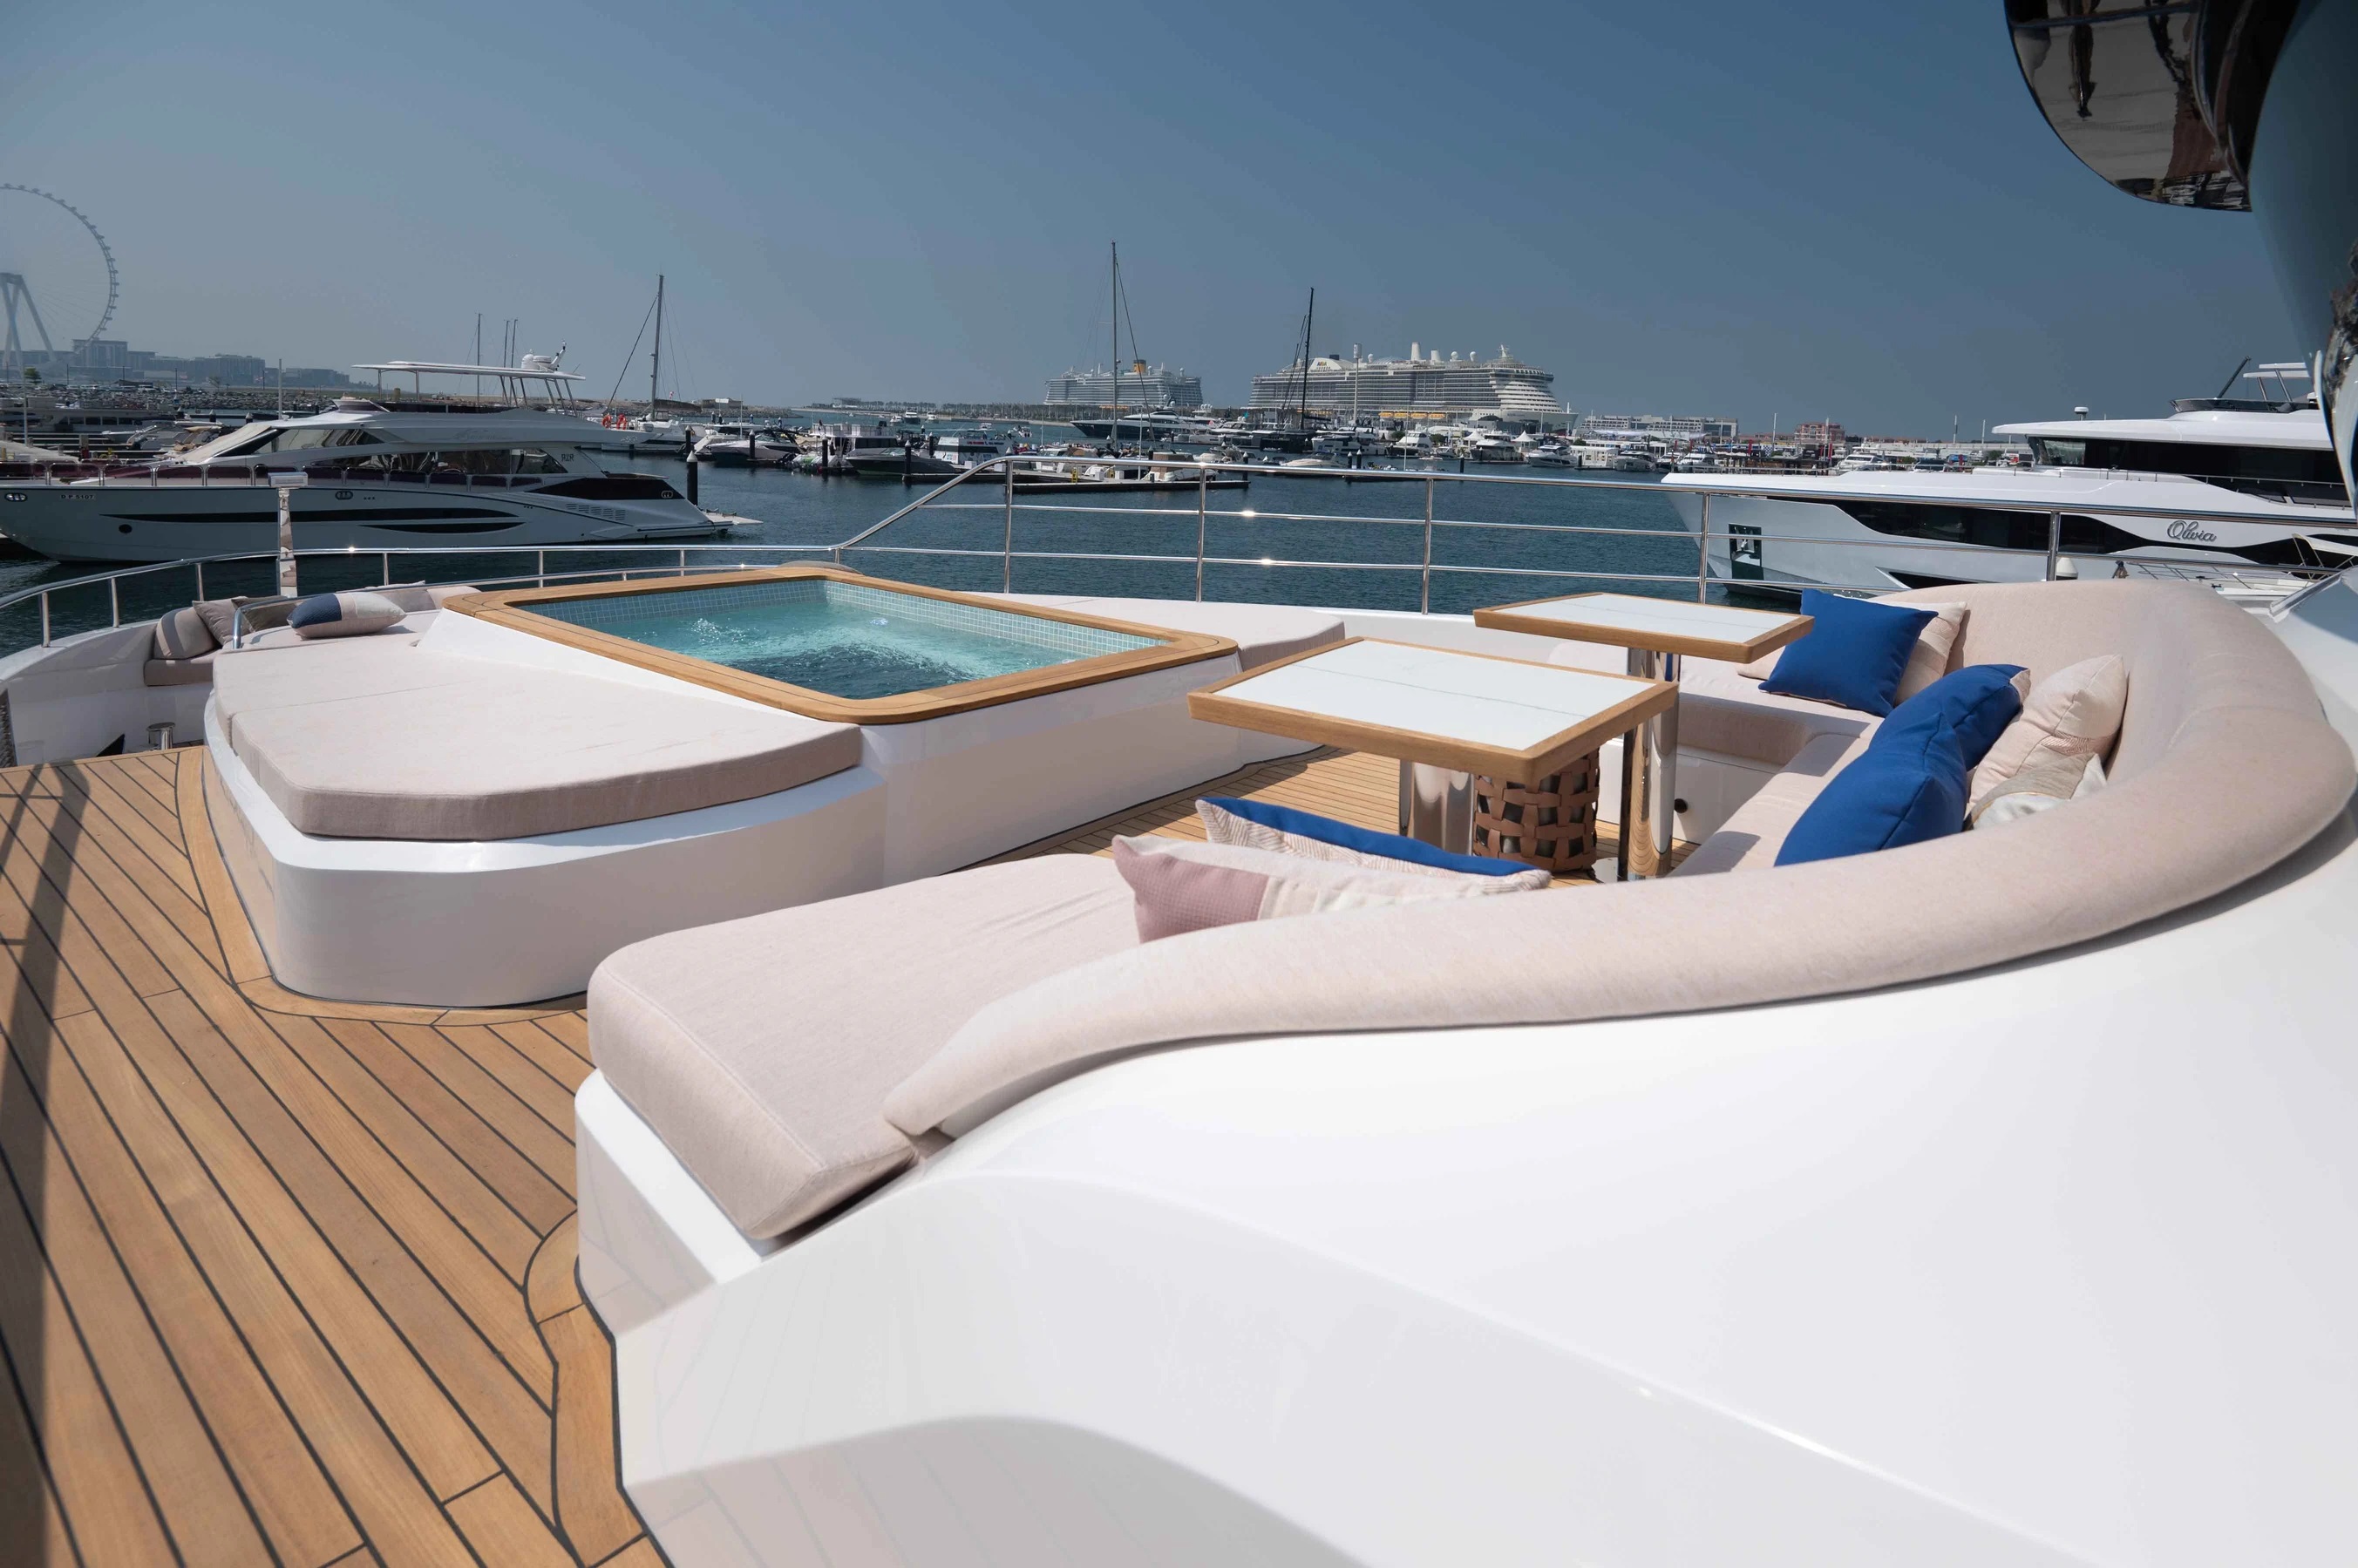 Foredeck Seating Area And Pool